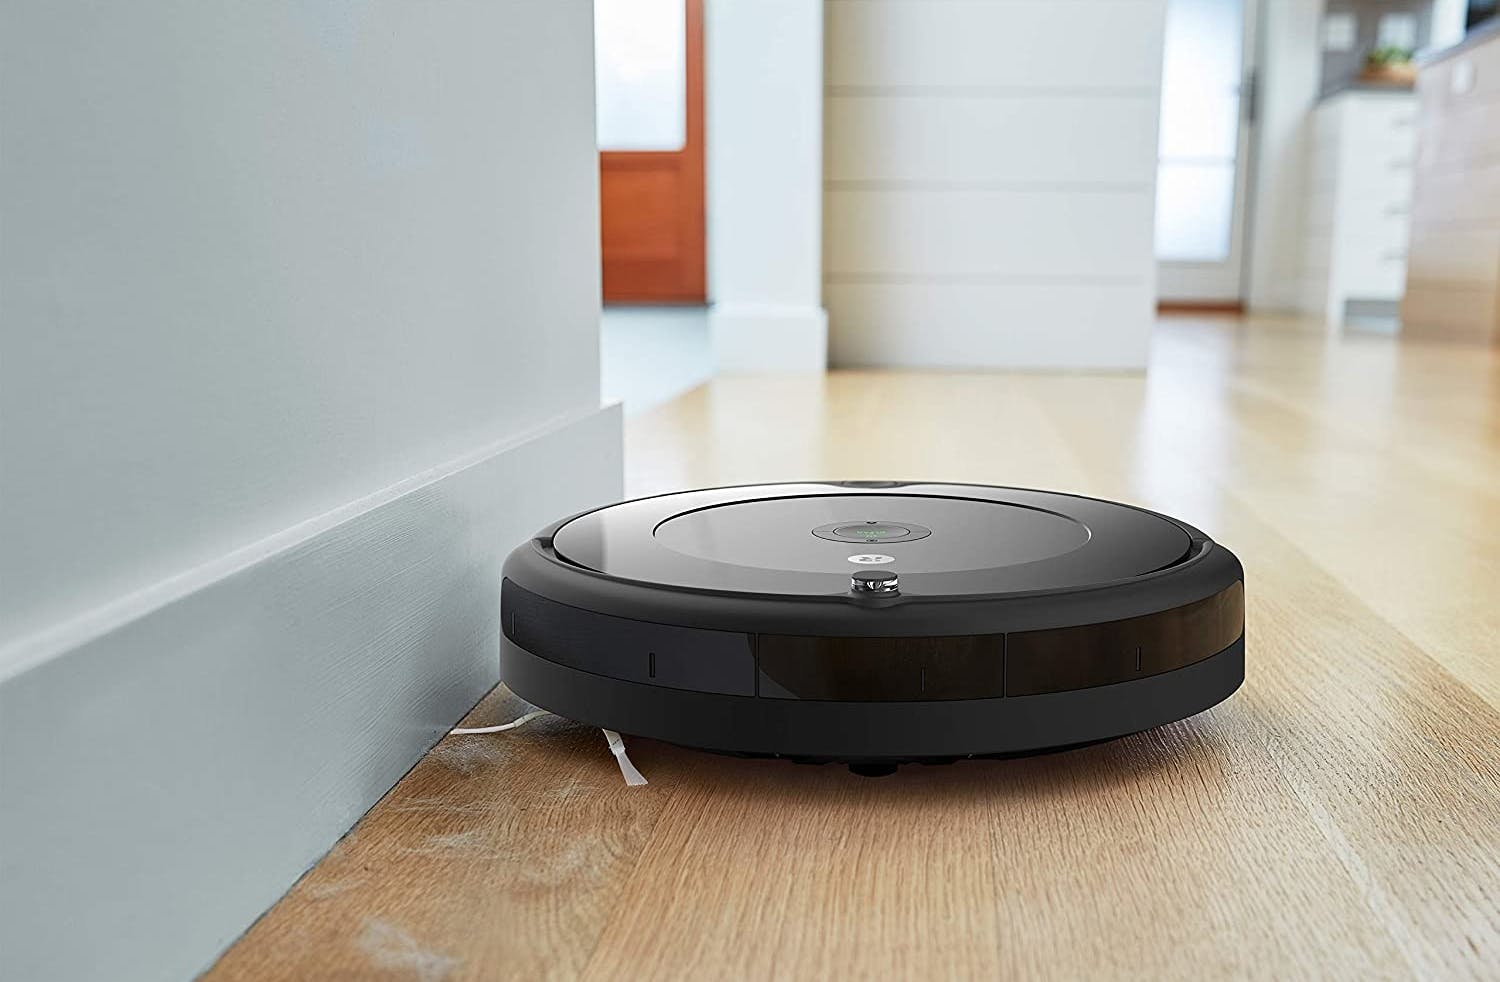 The Roomba i7+ is the robot vacuum I've been waiting for